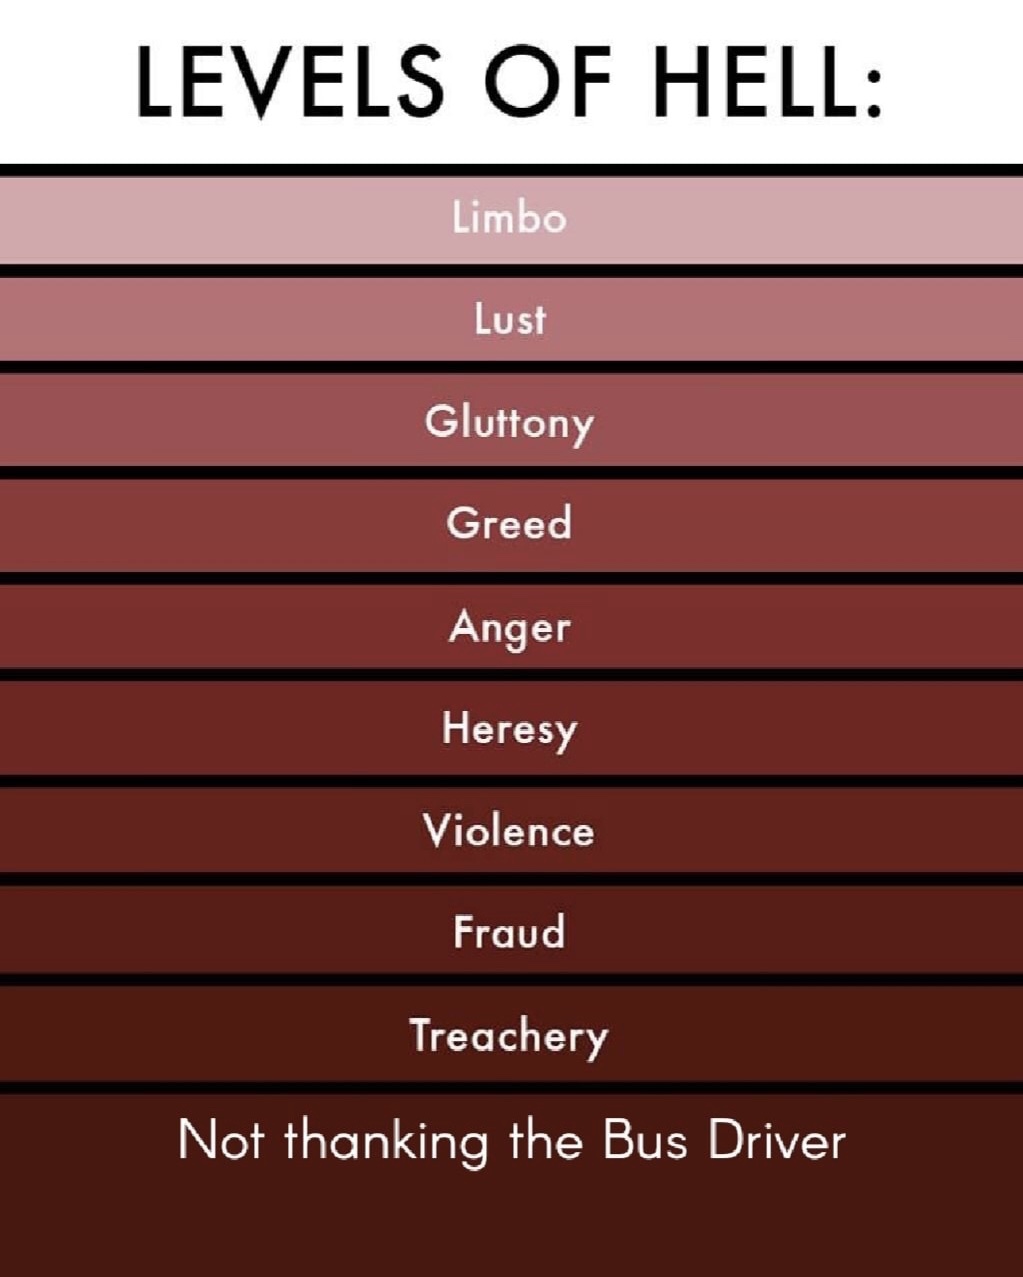 levels of hell meme template - Levels Of Hell Limbo Lust Gluttony Greed Anger Heresy Violence Fraud ice Treachery Not thanking the Bus Driver